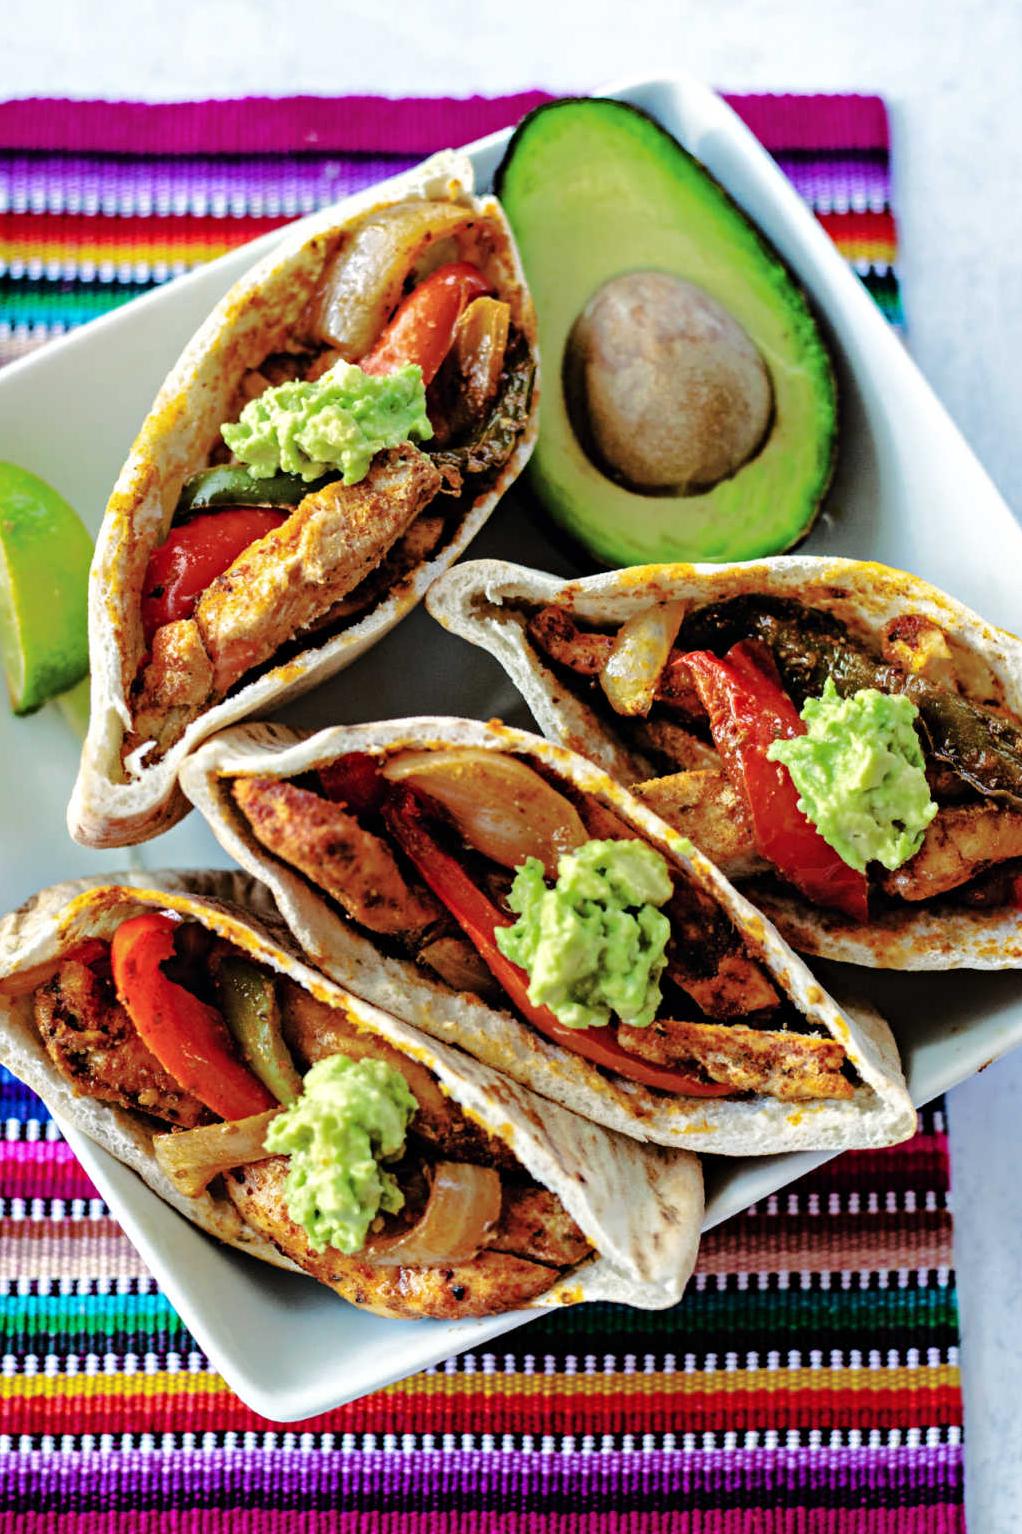  Quick and easy to prepare, these Fajita Pitas are perfect for a busy weeknight meal.